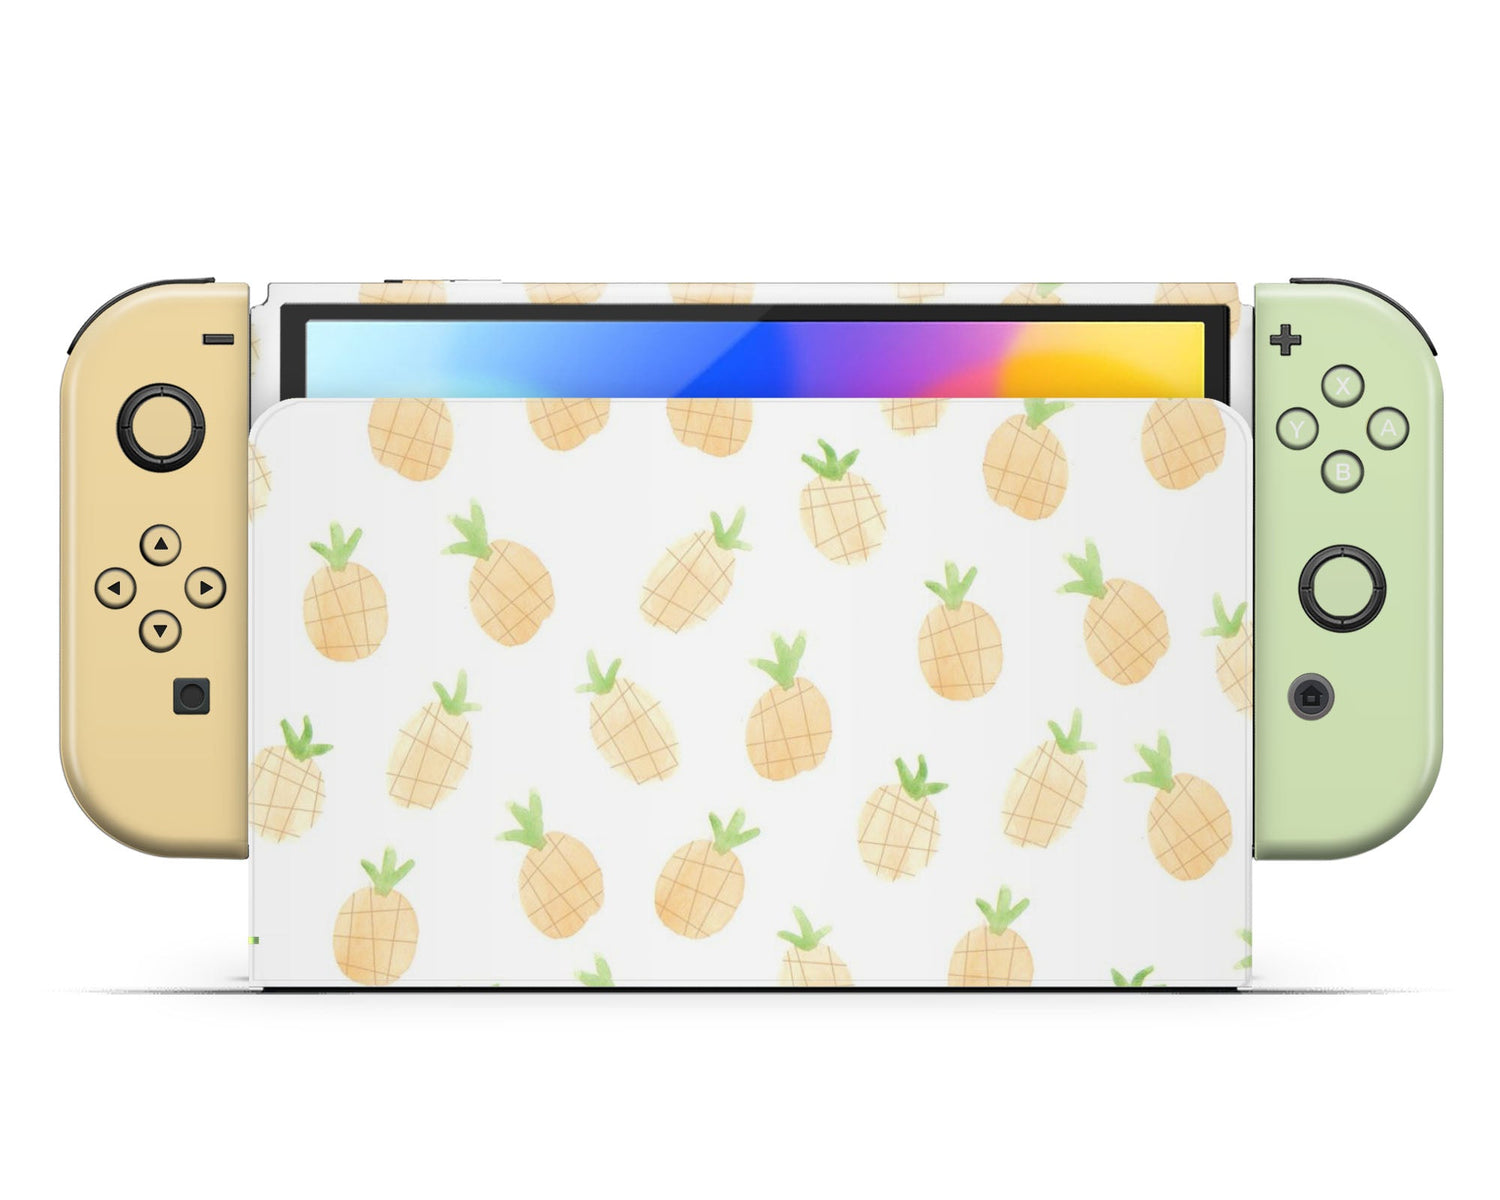 Lux Skins Nintendo Switch OLED Summer Pineapple Yellow Green Full Set +Tempered Glass Skins - Pattern Fruits Skin